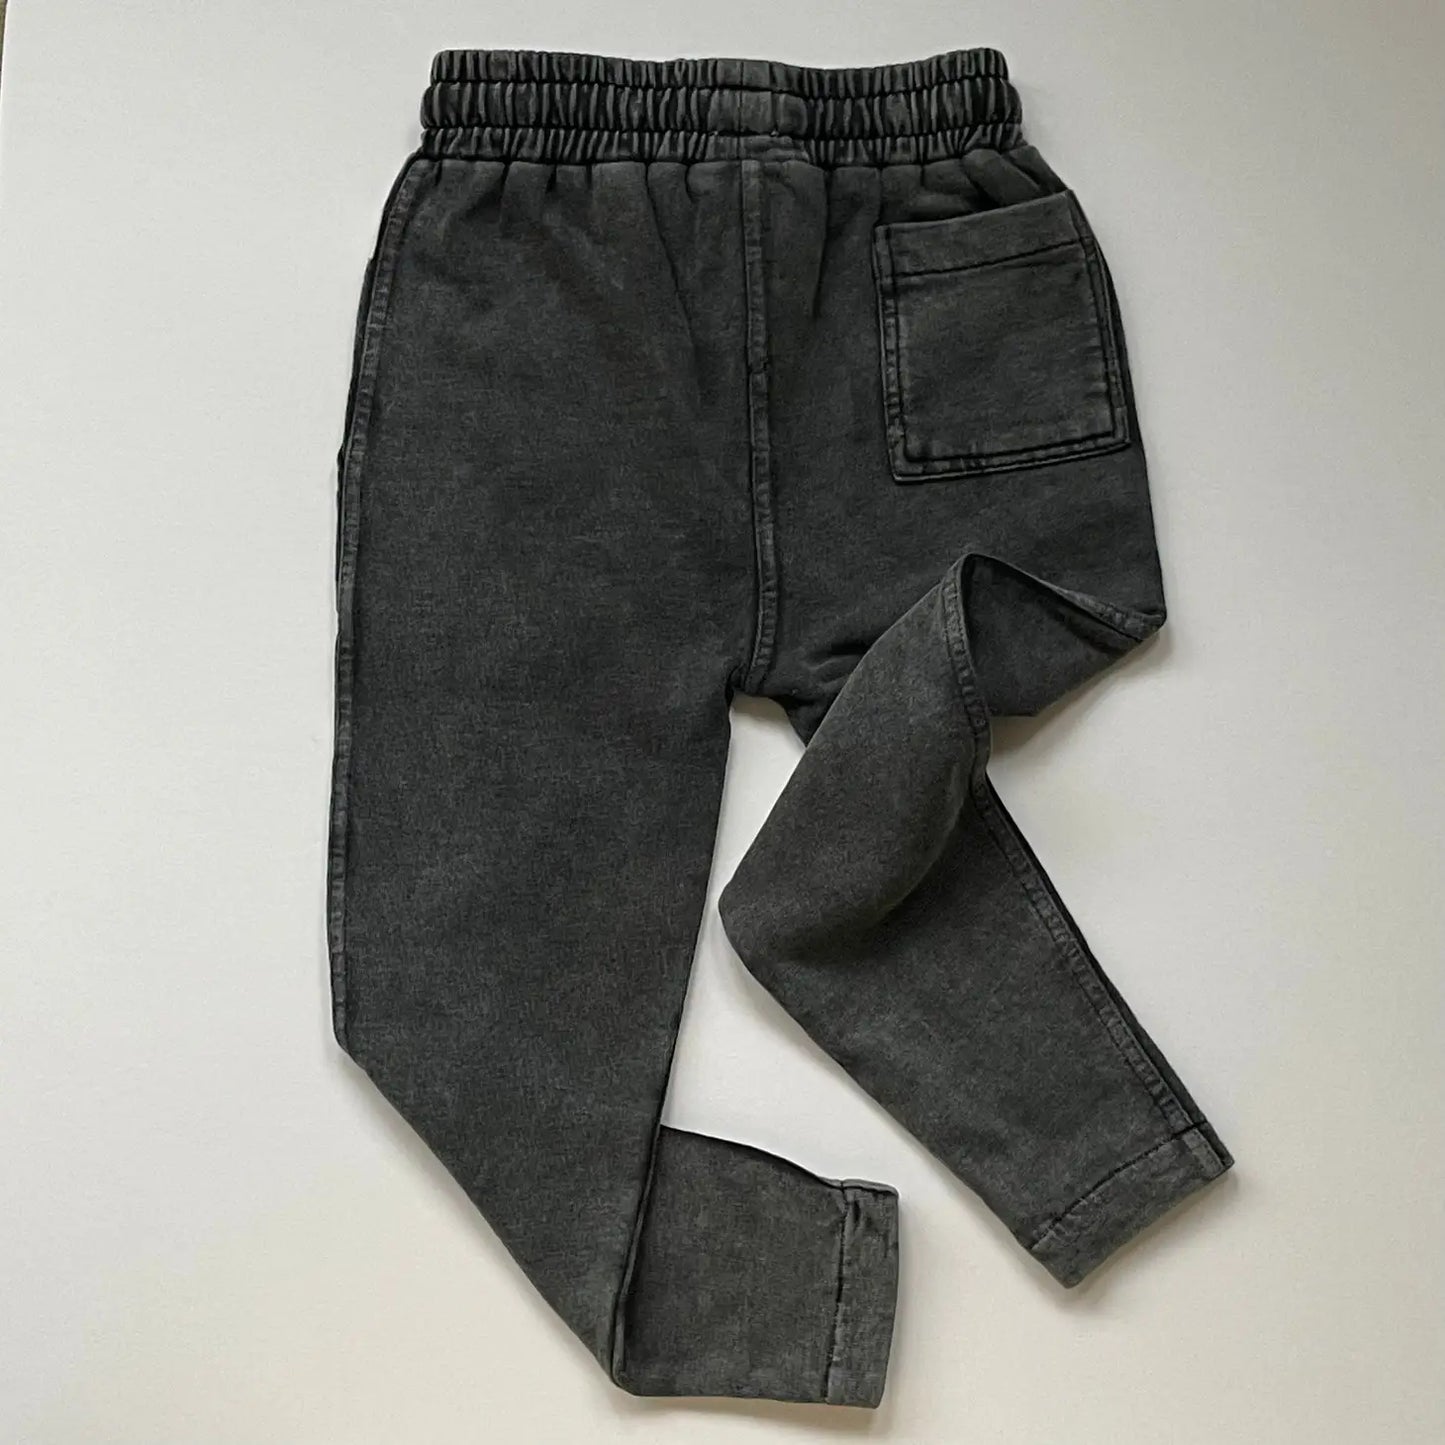 Washed Fatigue Organic Cotton Bottoms - Charcoal